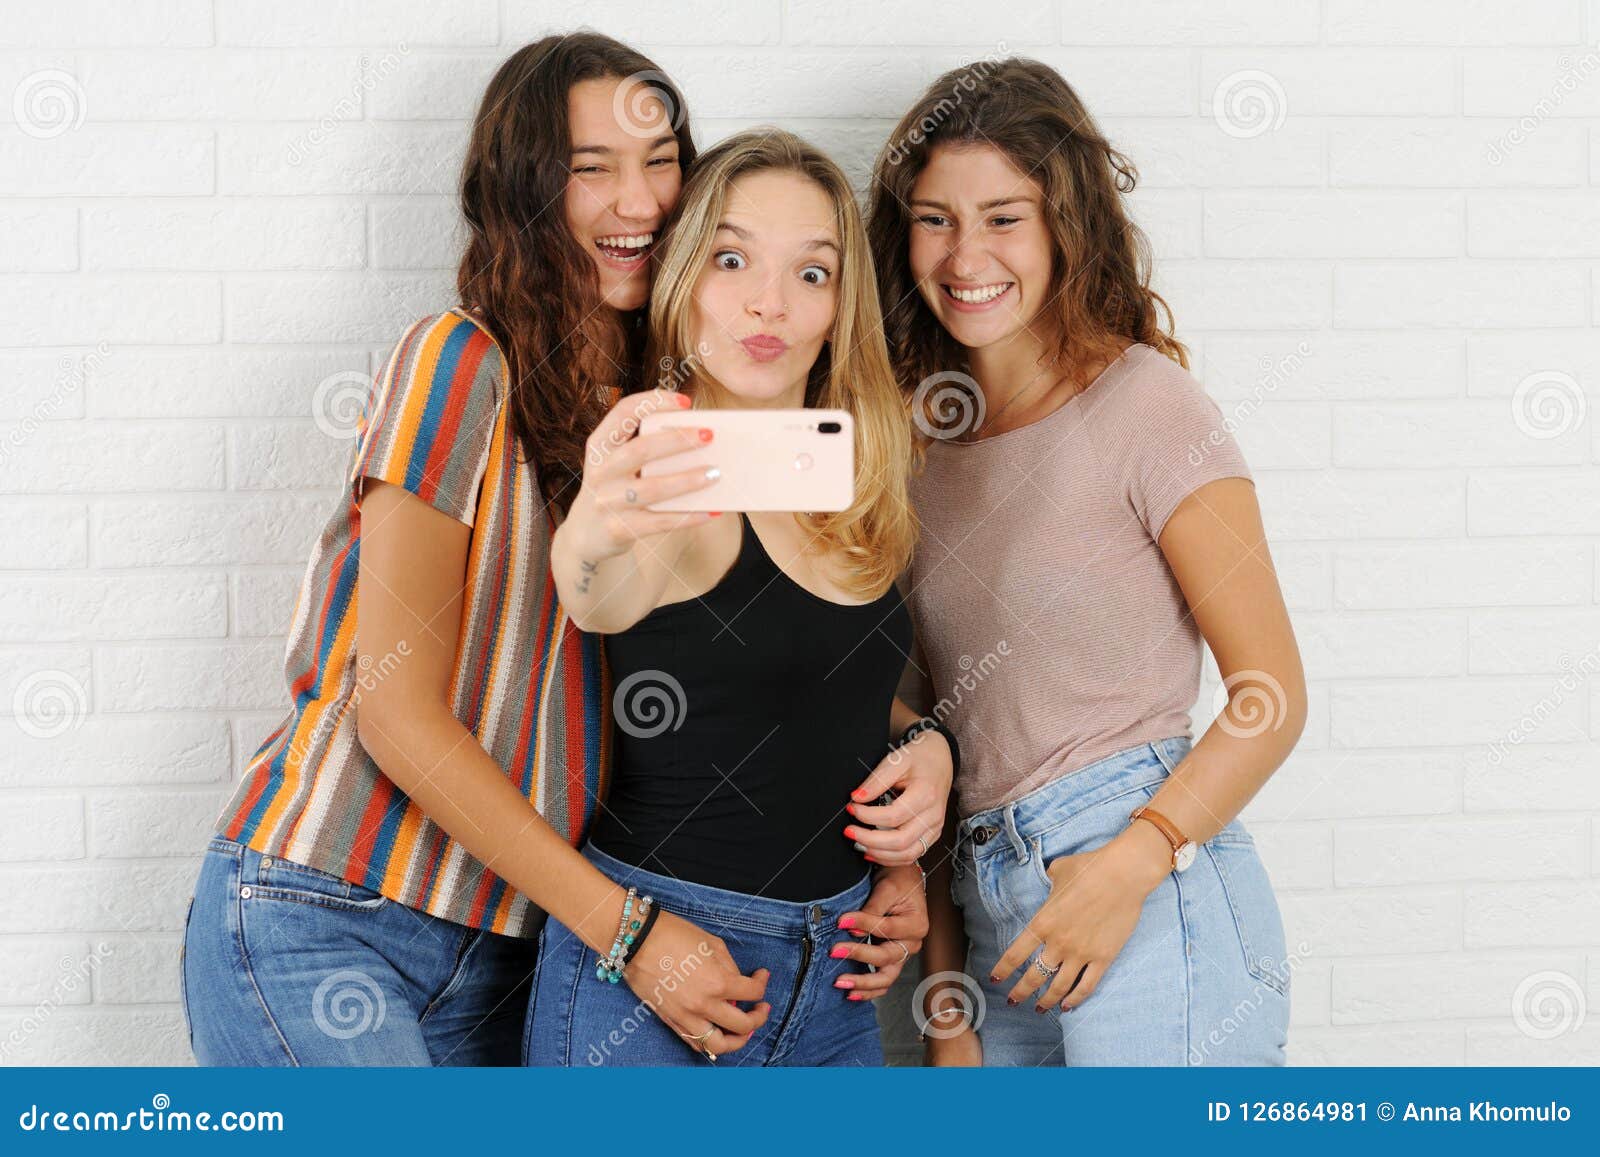 Selfie with friends stock image. Image of girls, smart - 126864981